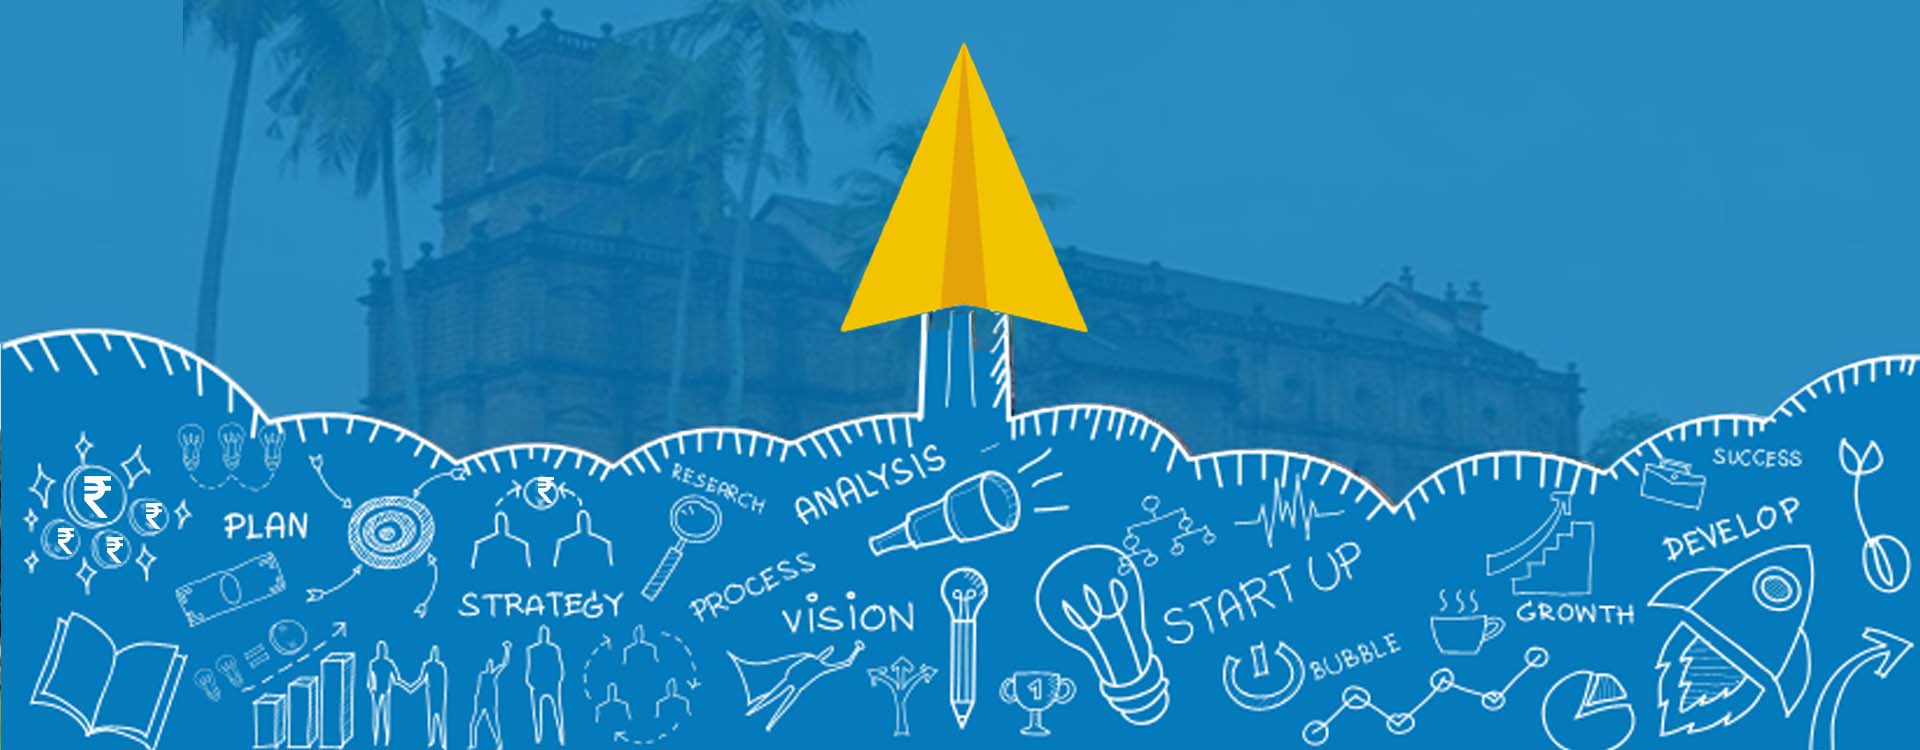 FiiRE is an incubation startup from Goa that focuses on tech startups to incubate.